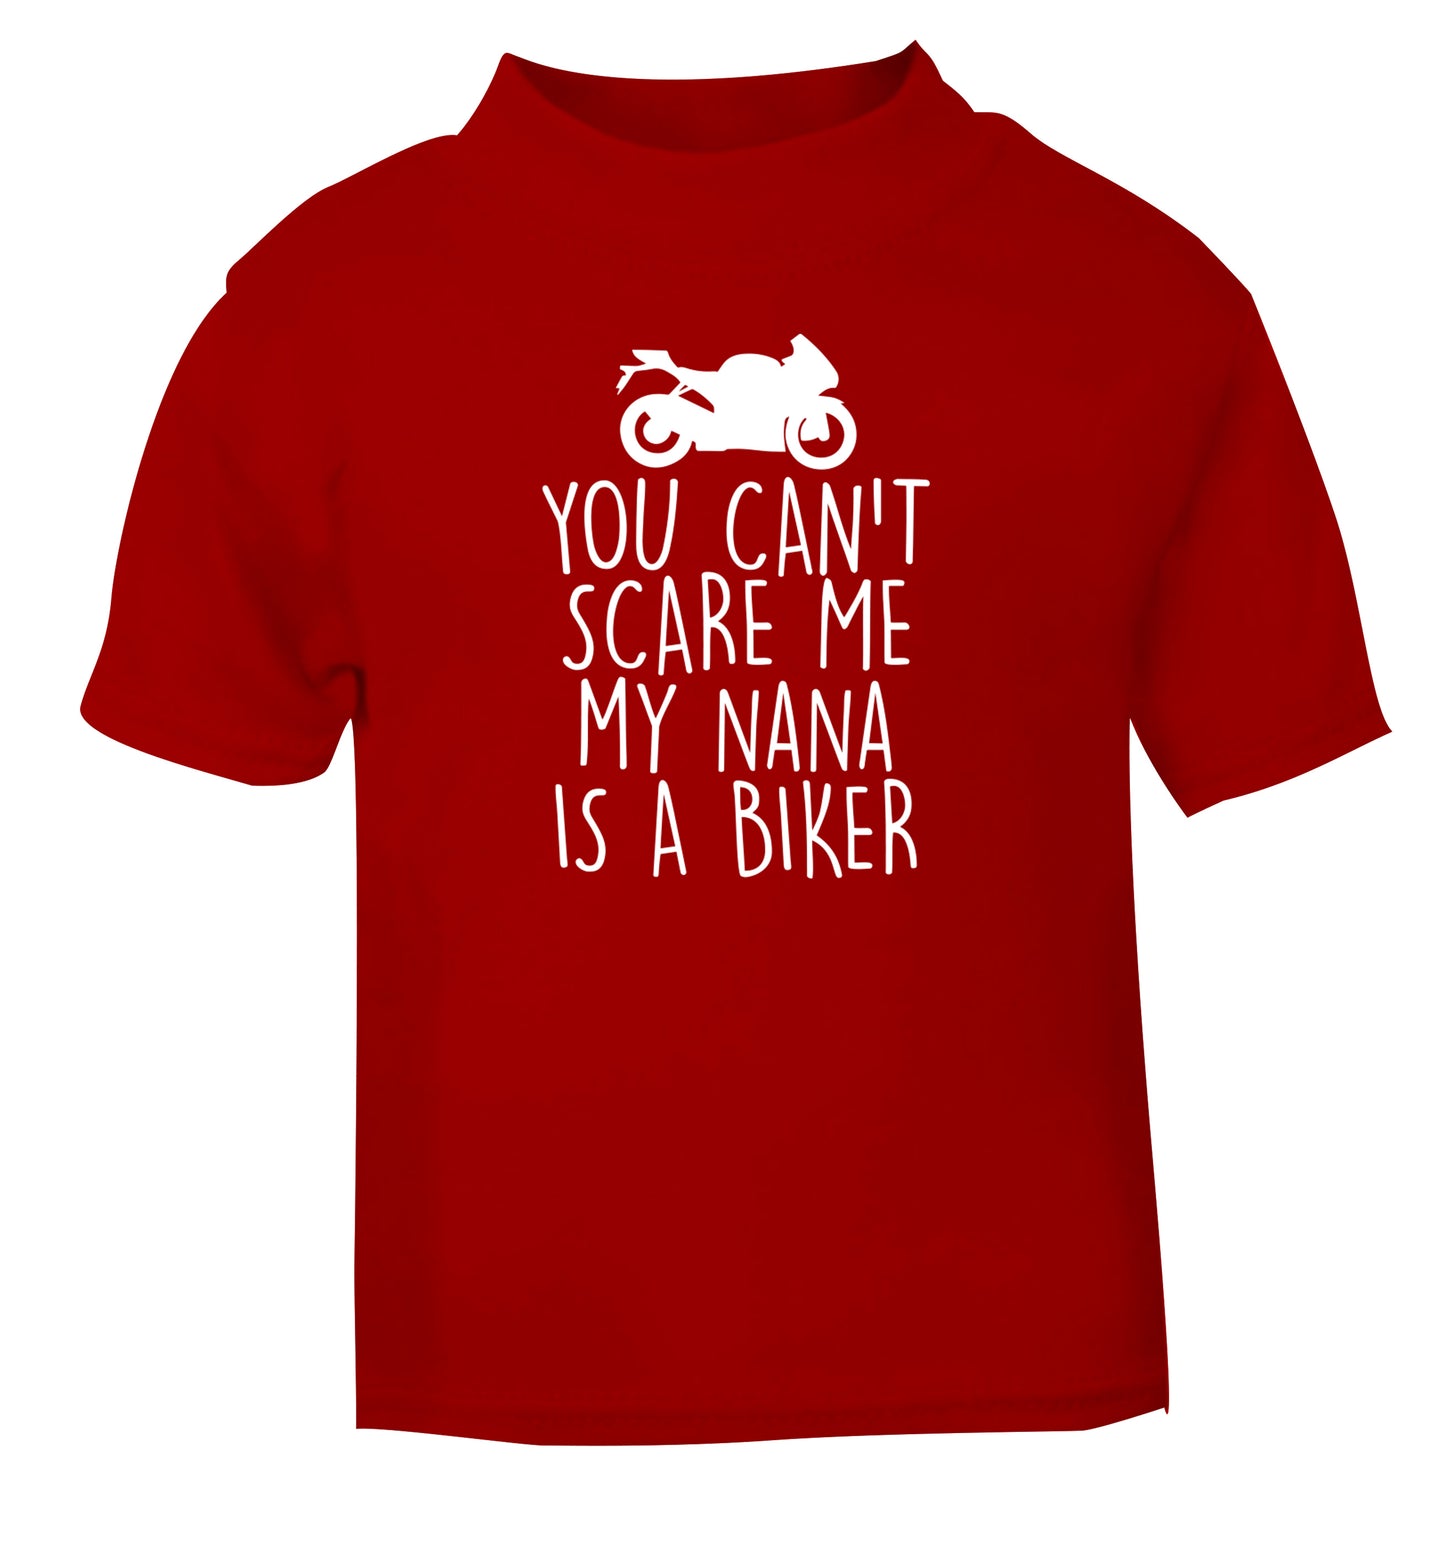 You can't scare me my nana is a biker red Baby Toddler Tshirt 2 Years